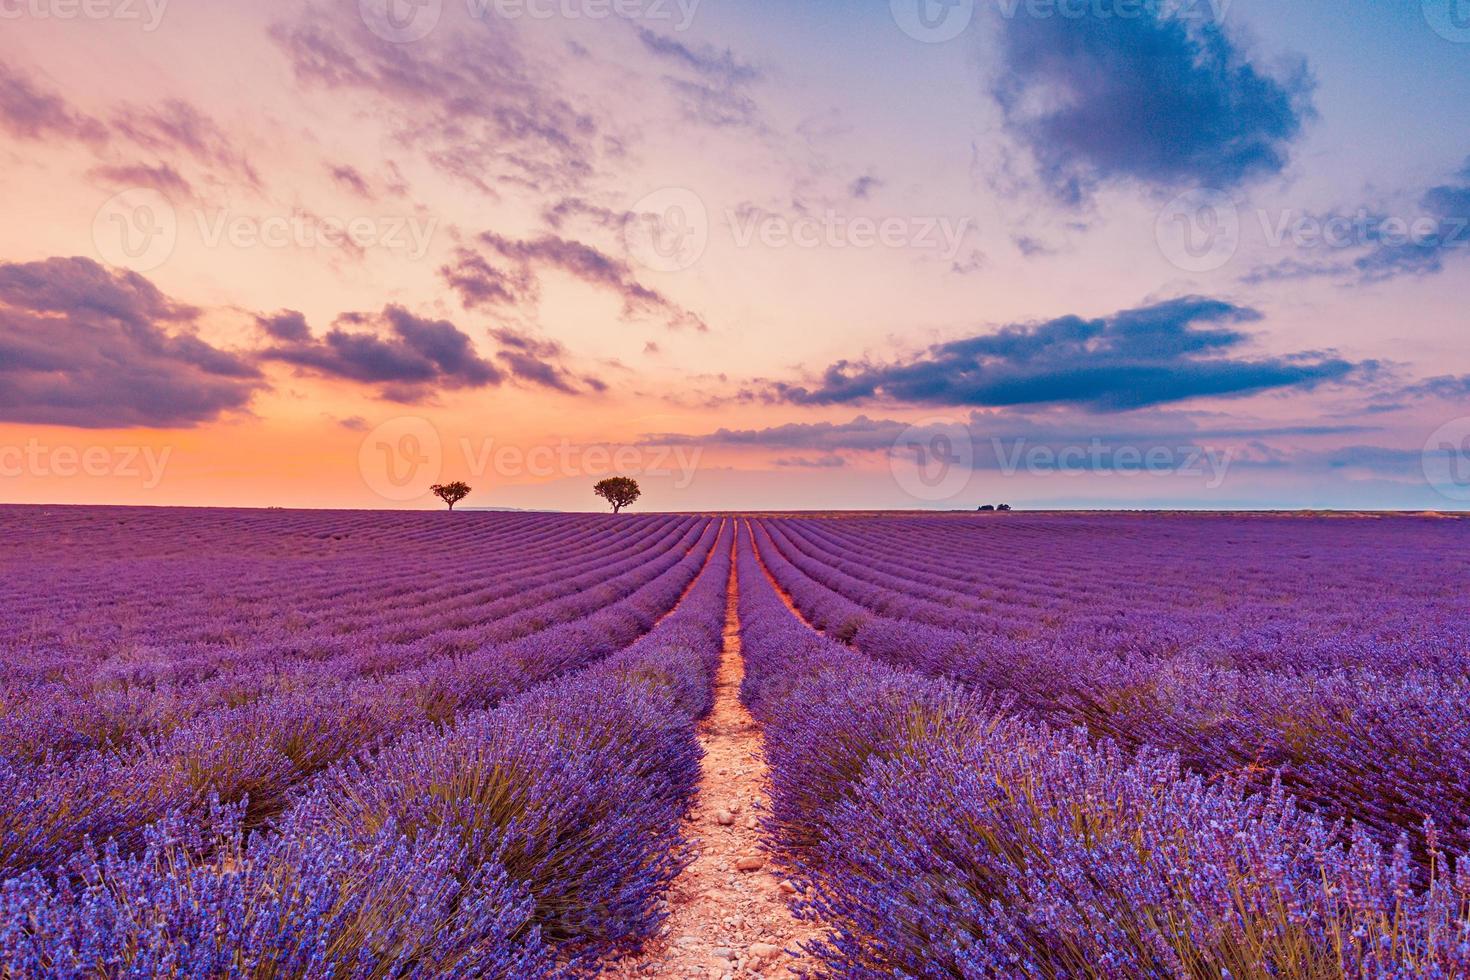 Tree in lavender field at sunset in Provence. Dream nature landscape, fantastic colors over lonely tree with amazing sunset sky, colorful clouds. Tranquil nature scene, beautiful seasonal landscape photo